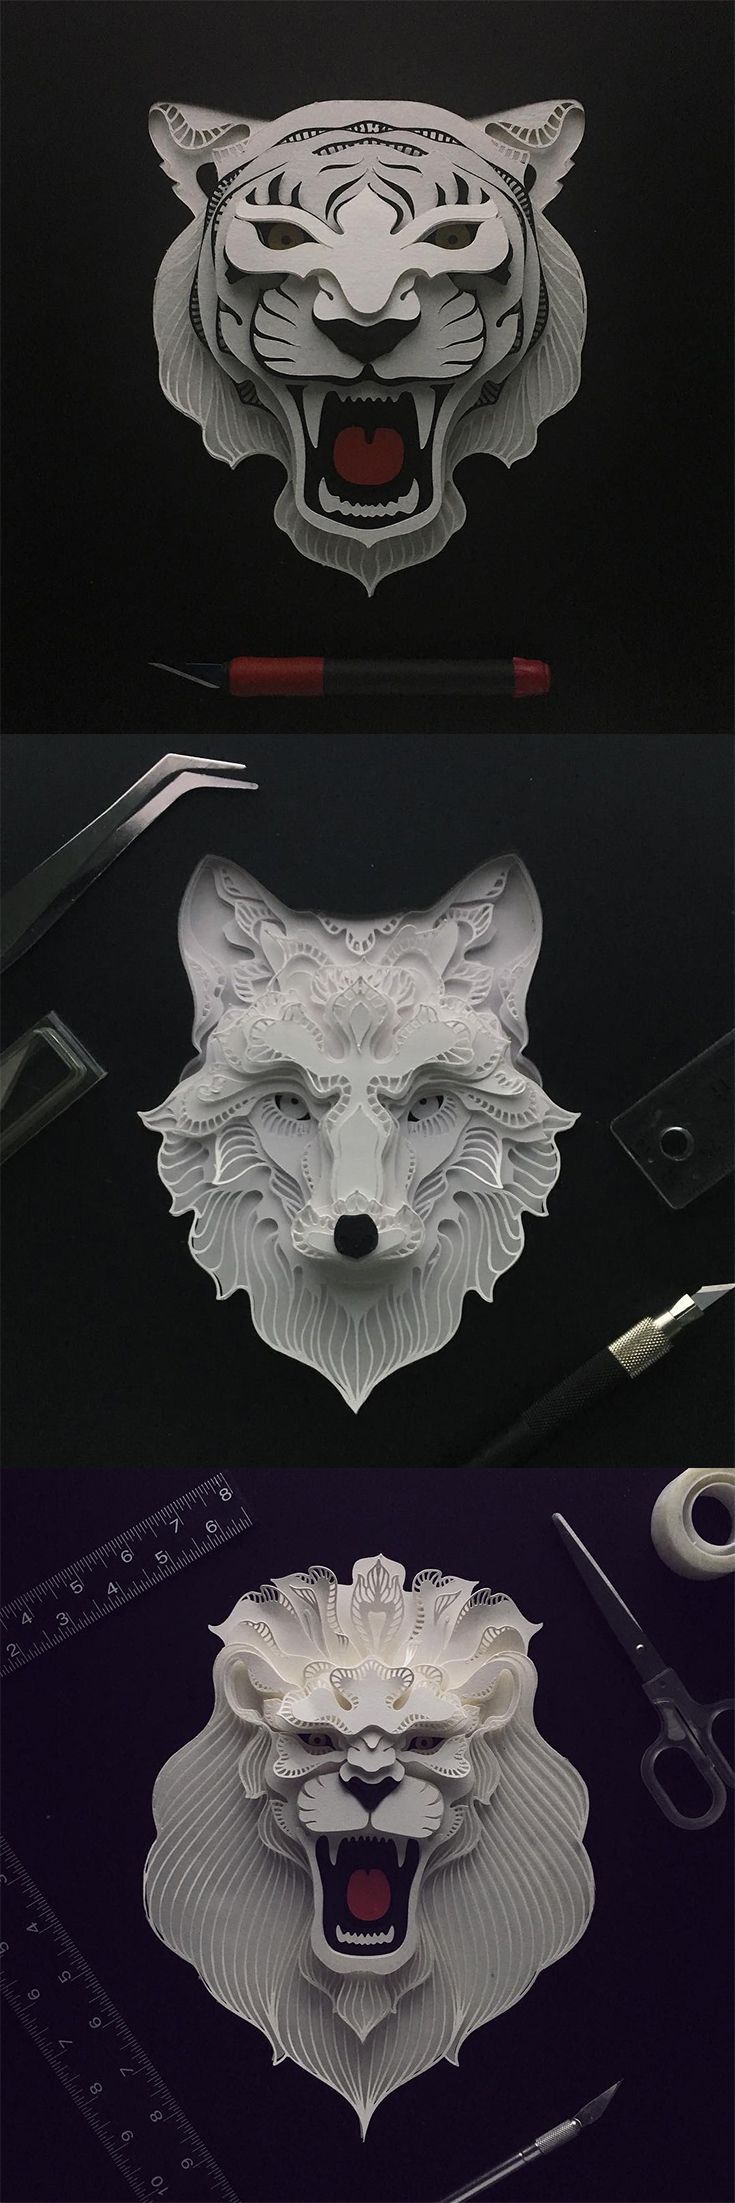 Click for more pics! | Patrick Cabral Explores The Animal Form Through Delicate Layered Papercuts #paperart